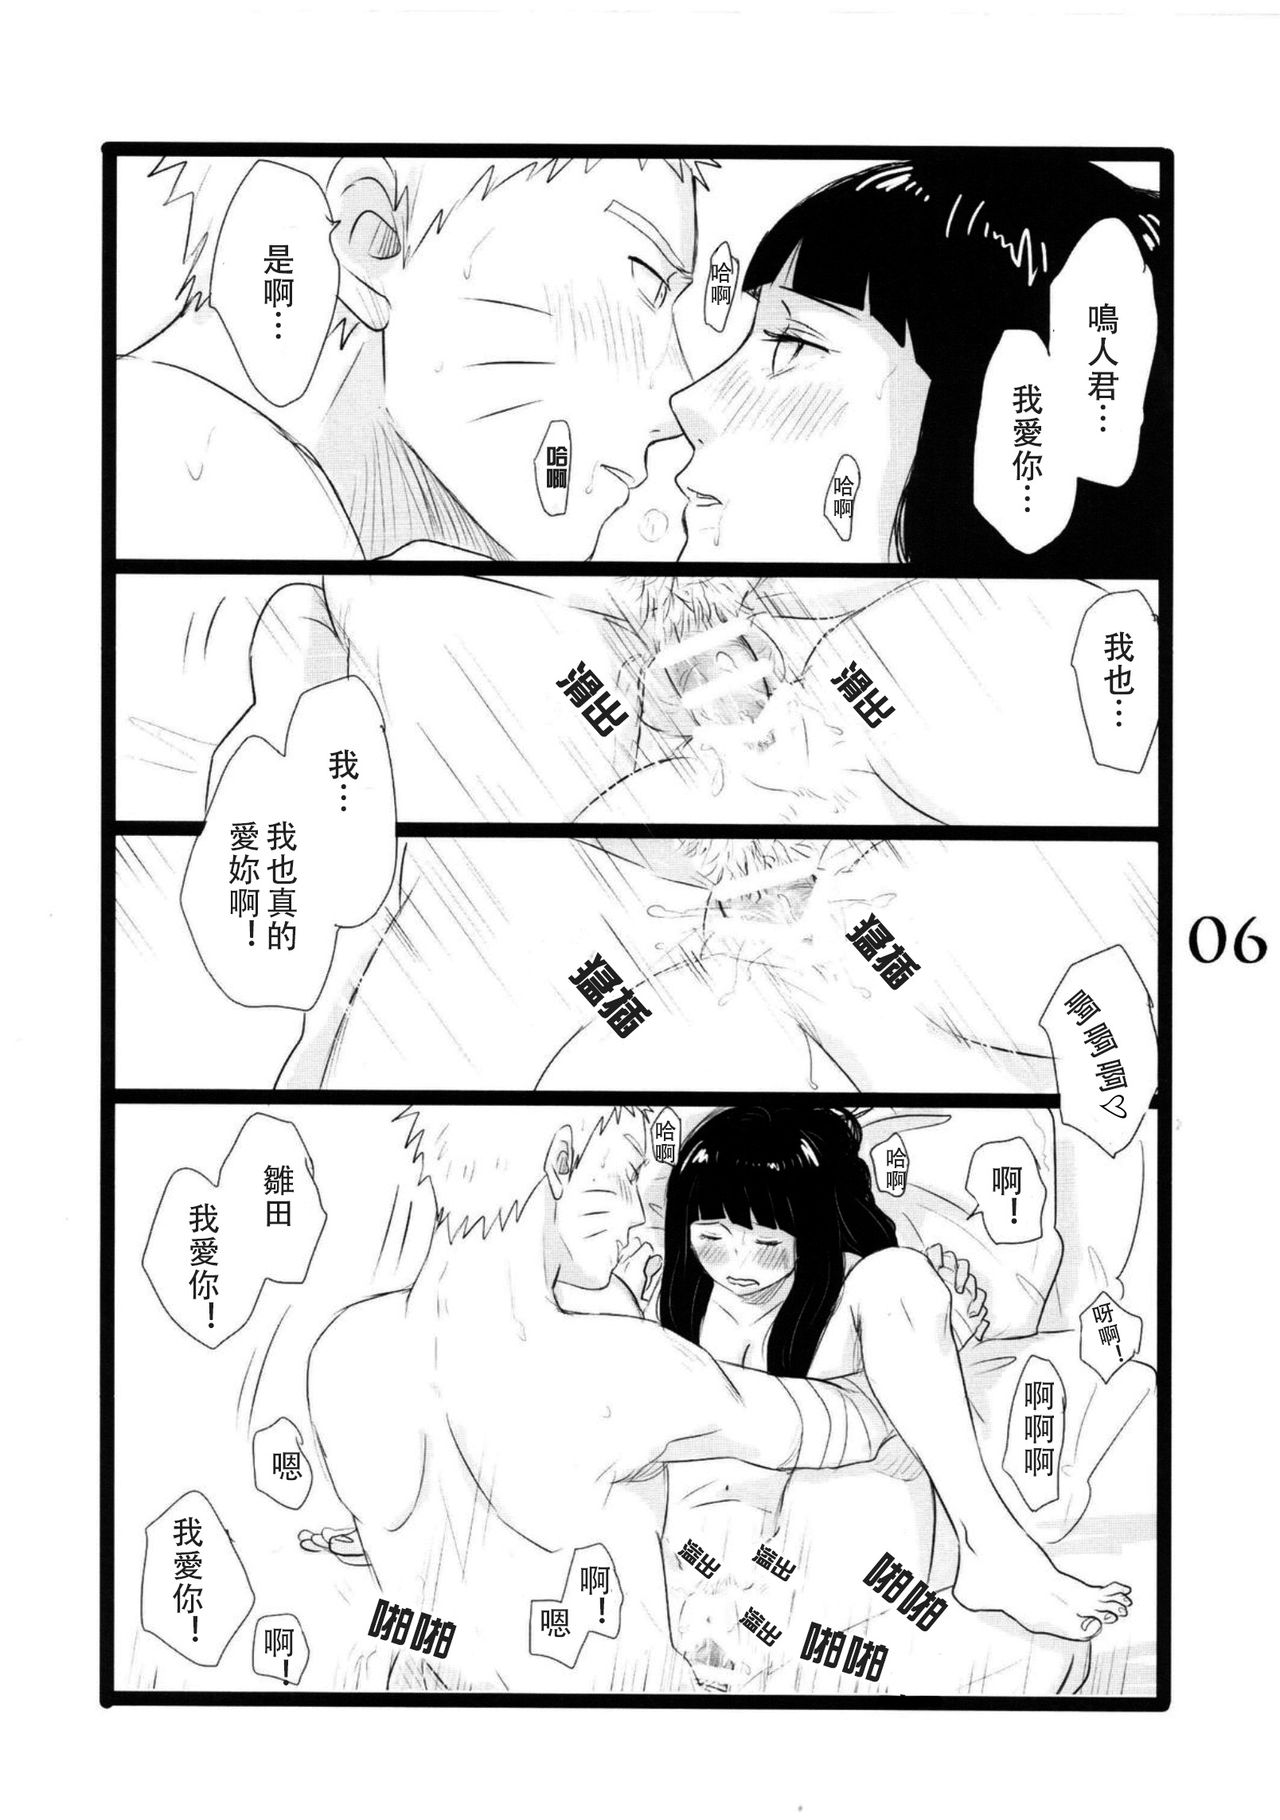 (C88) [blink (shimoyake)] YOUR MY SWEET - I LOVE YOU DARLING (Naruto) [Chinese] [沒有漢化] page 7 full